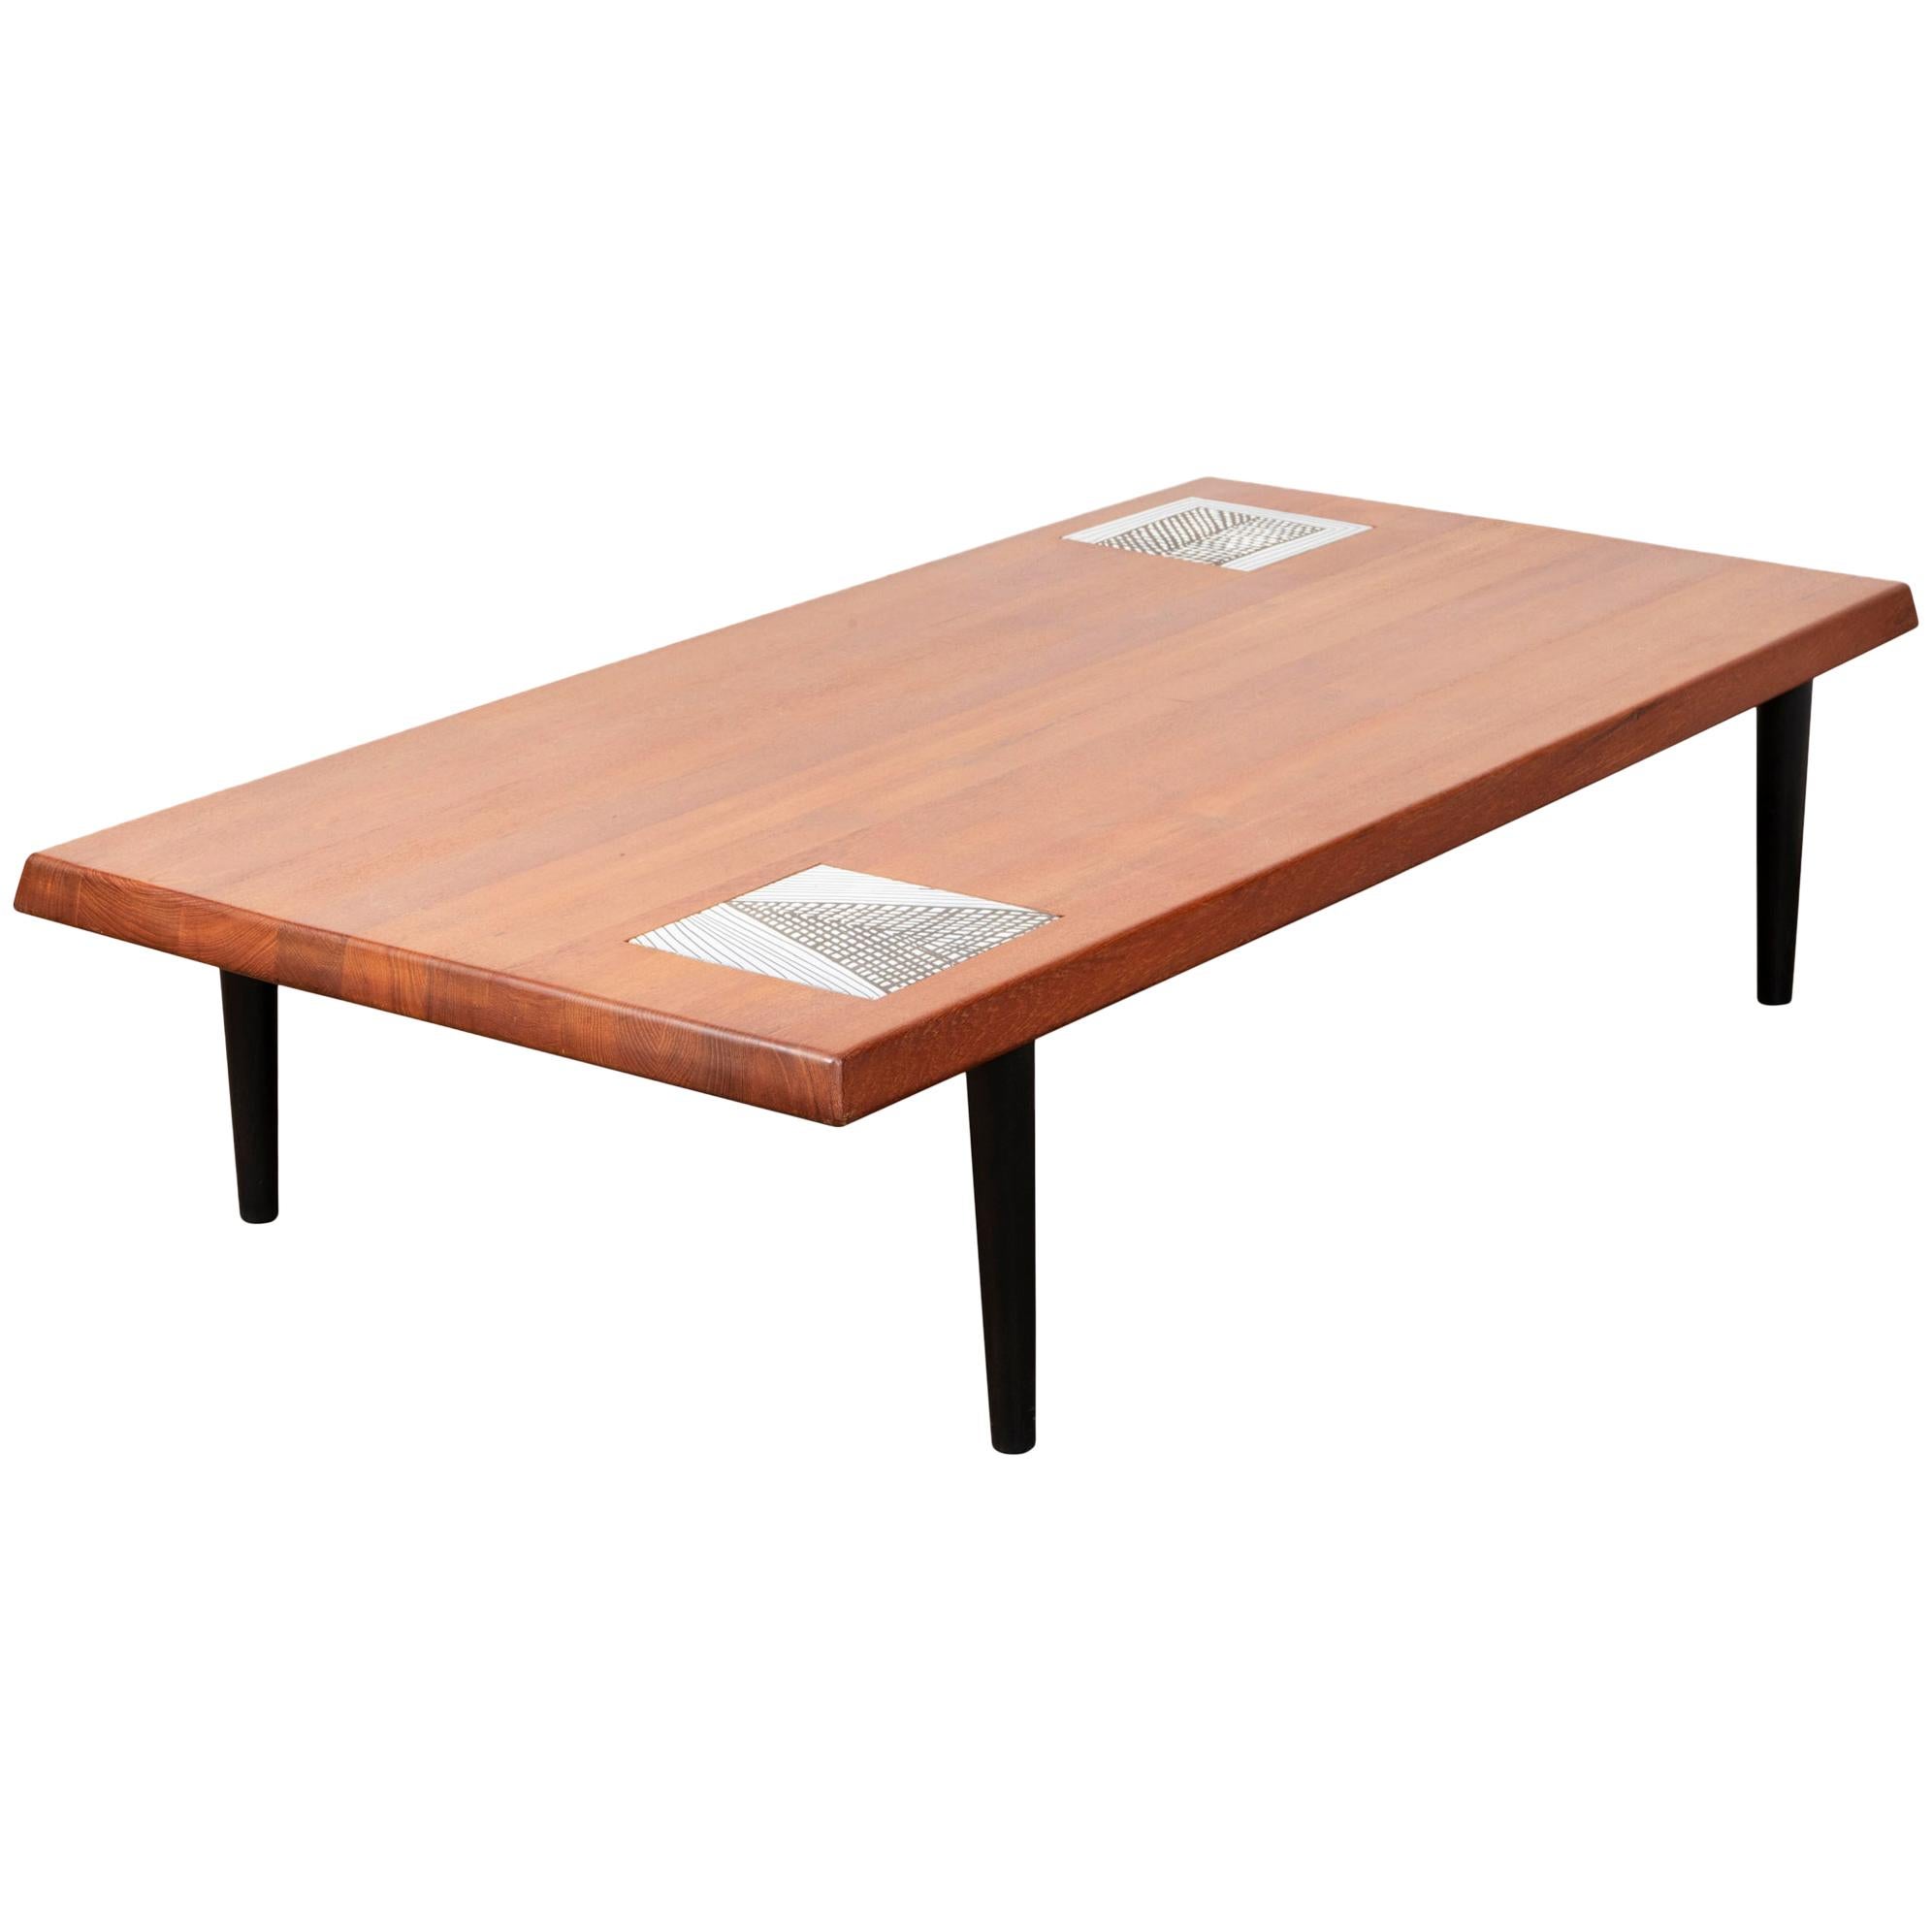 Large Walnut Coffee Table with Ceramic Tiles by Capron